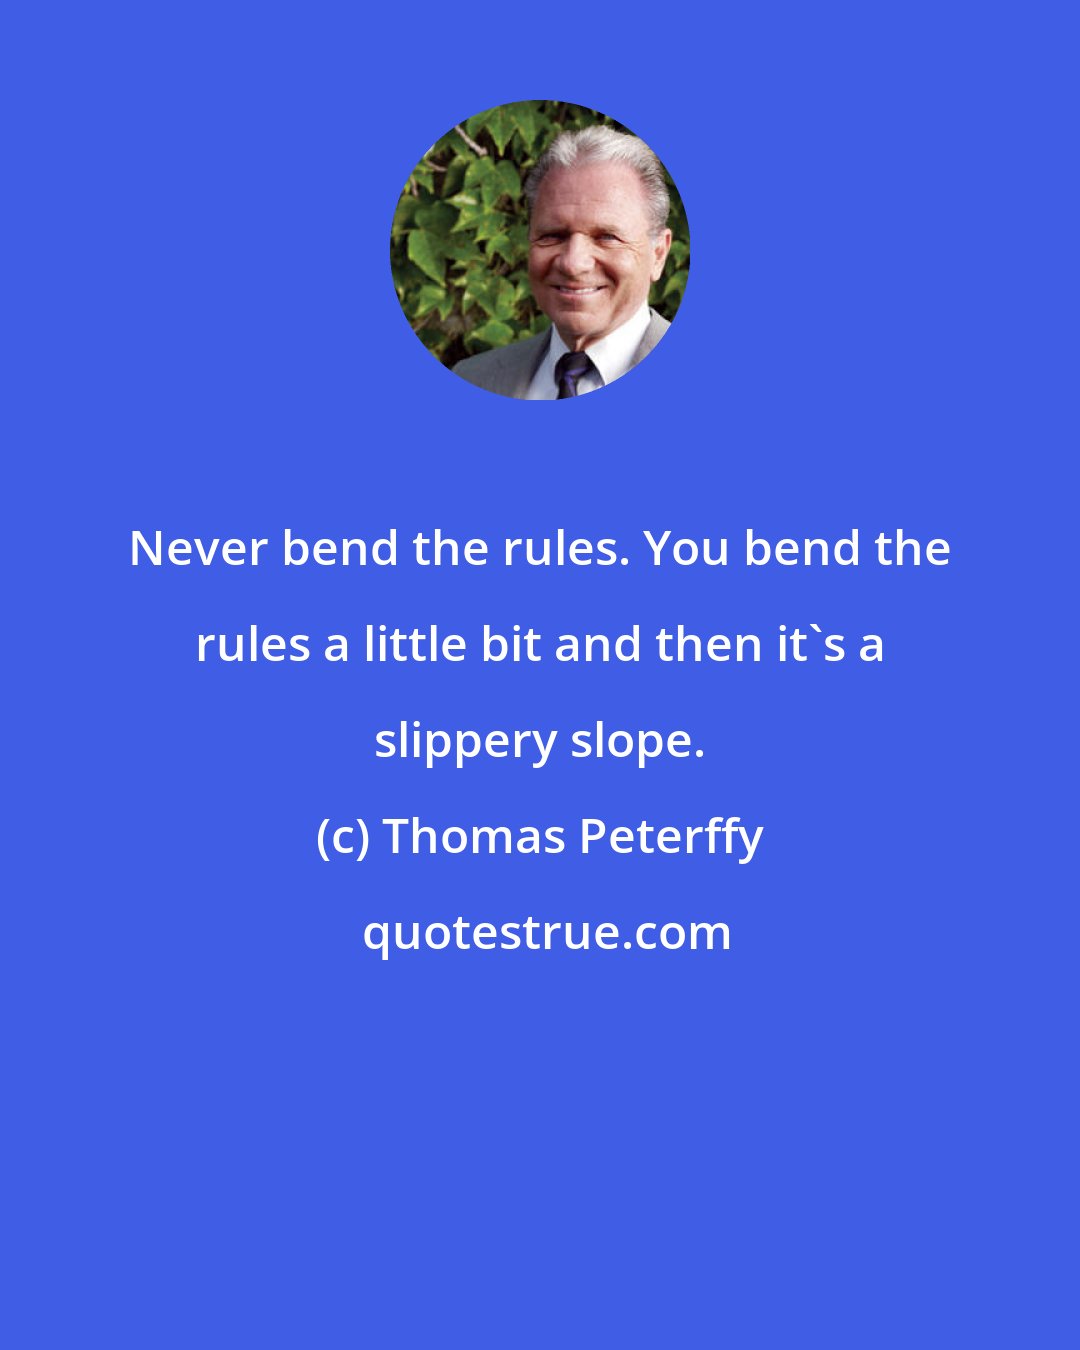 Thomas Peterffy: Never bend the rules. You bend the rules a little bit and then it's a slippery slope.